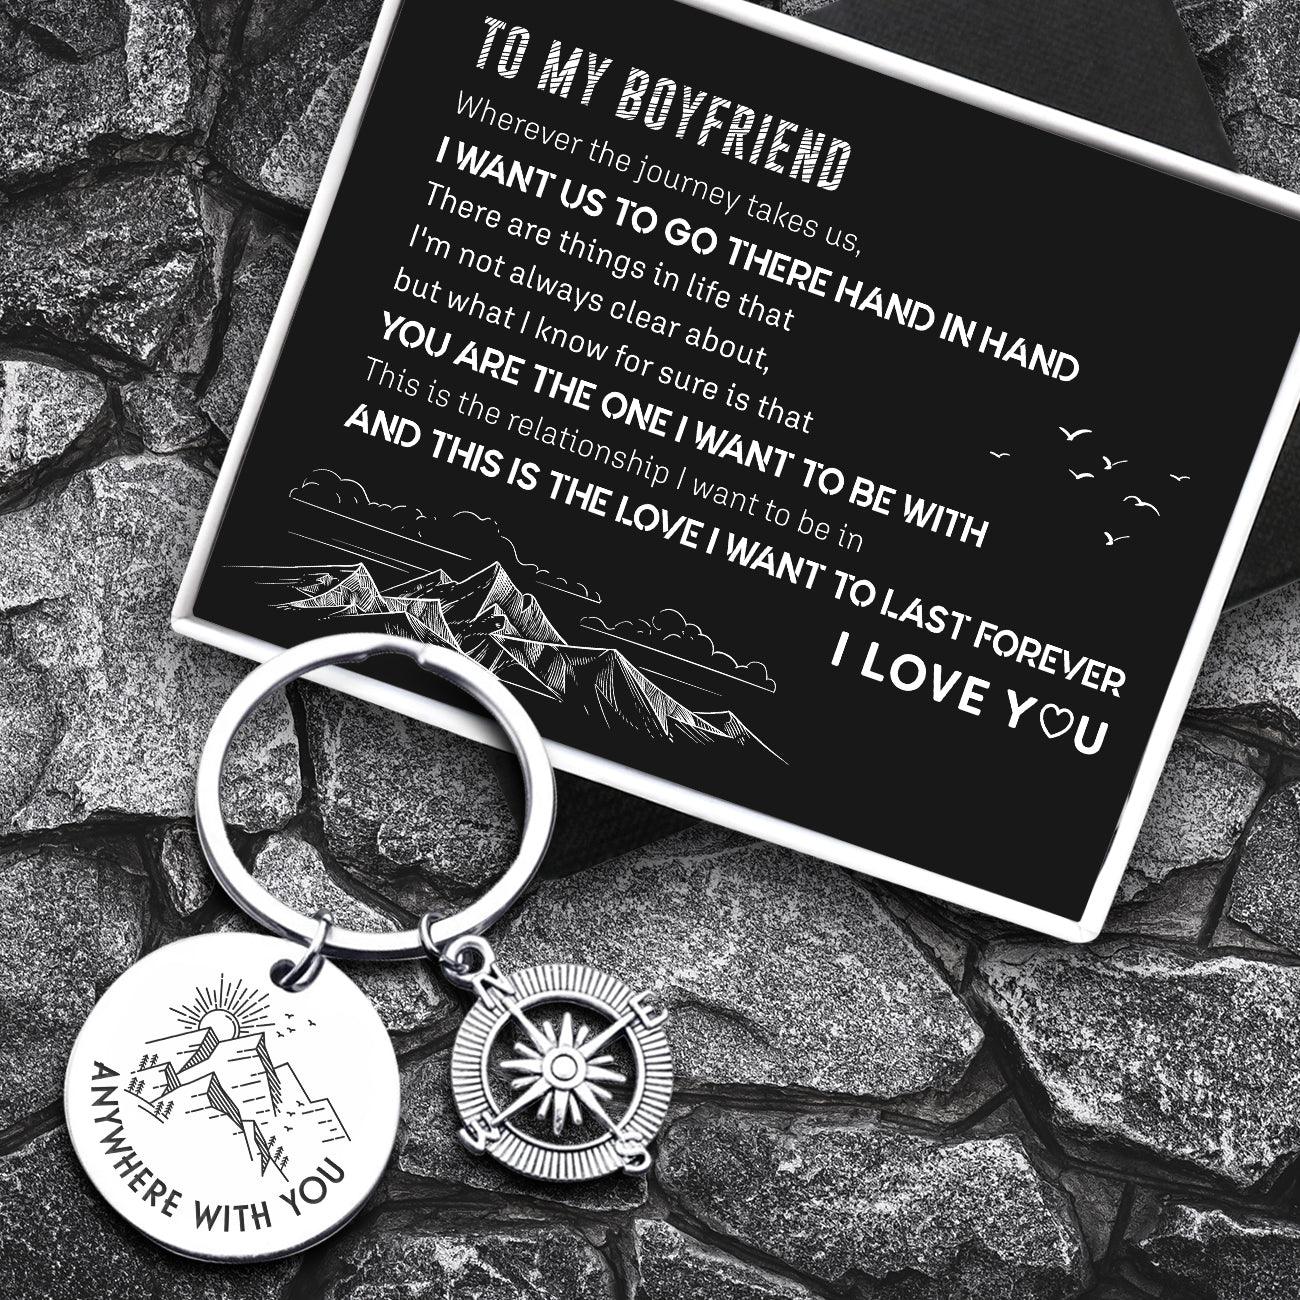 Compass Keychain - Travel - To My Boyfriend - I Want Us To Go There Hand In Hand - Augkw12001 - Gifts Holder